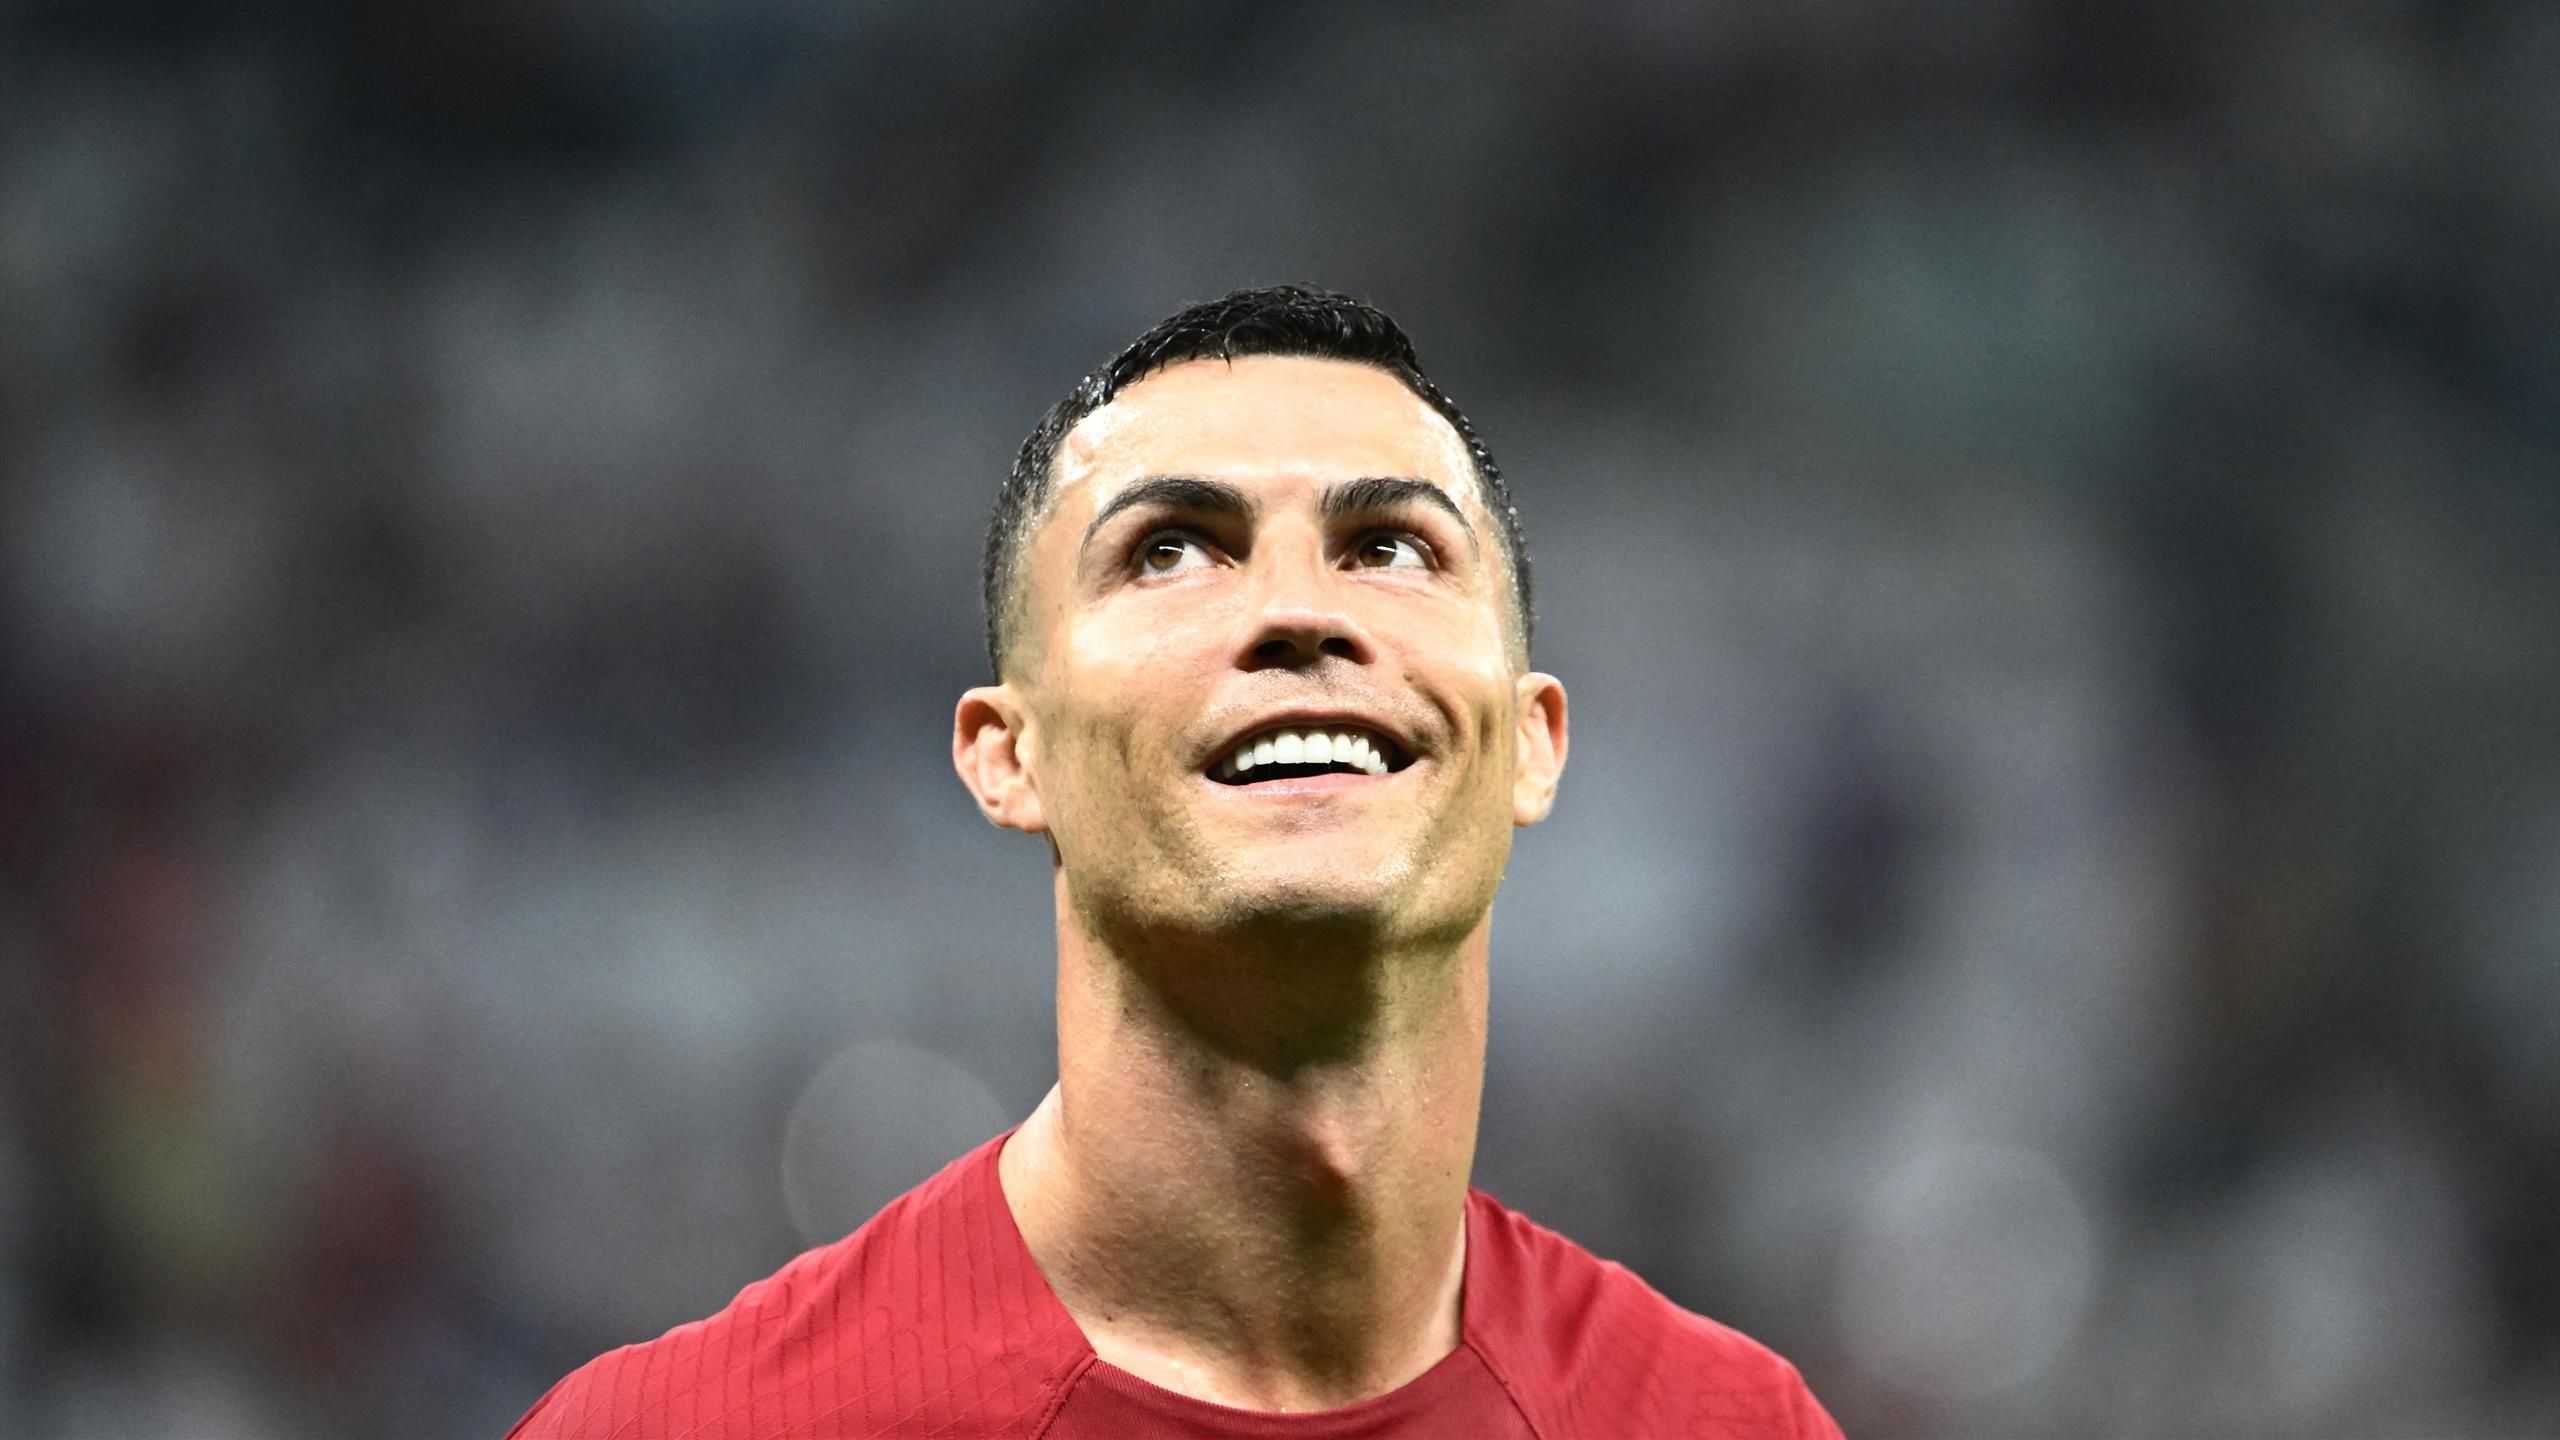 The clause that could let Cristiano Ronaldo leave Al Nassr and